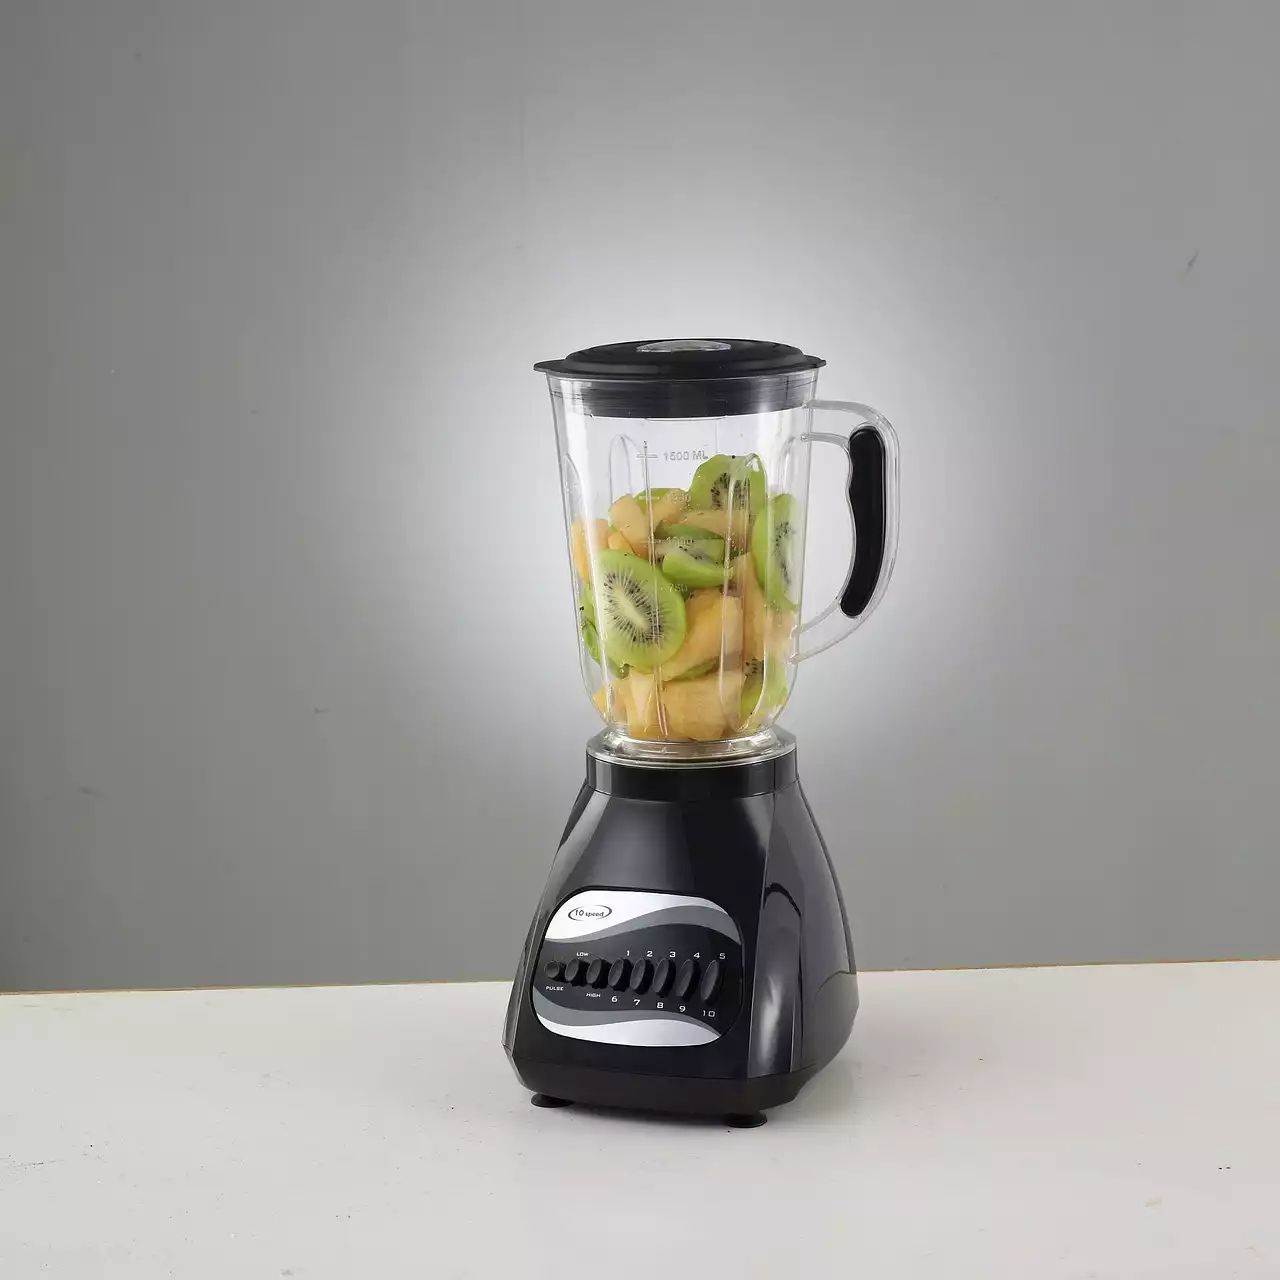 Types of Food Processor to Make Nutritious Meals